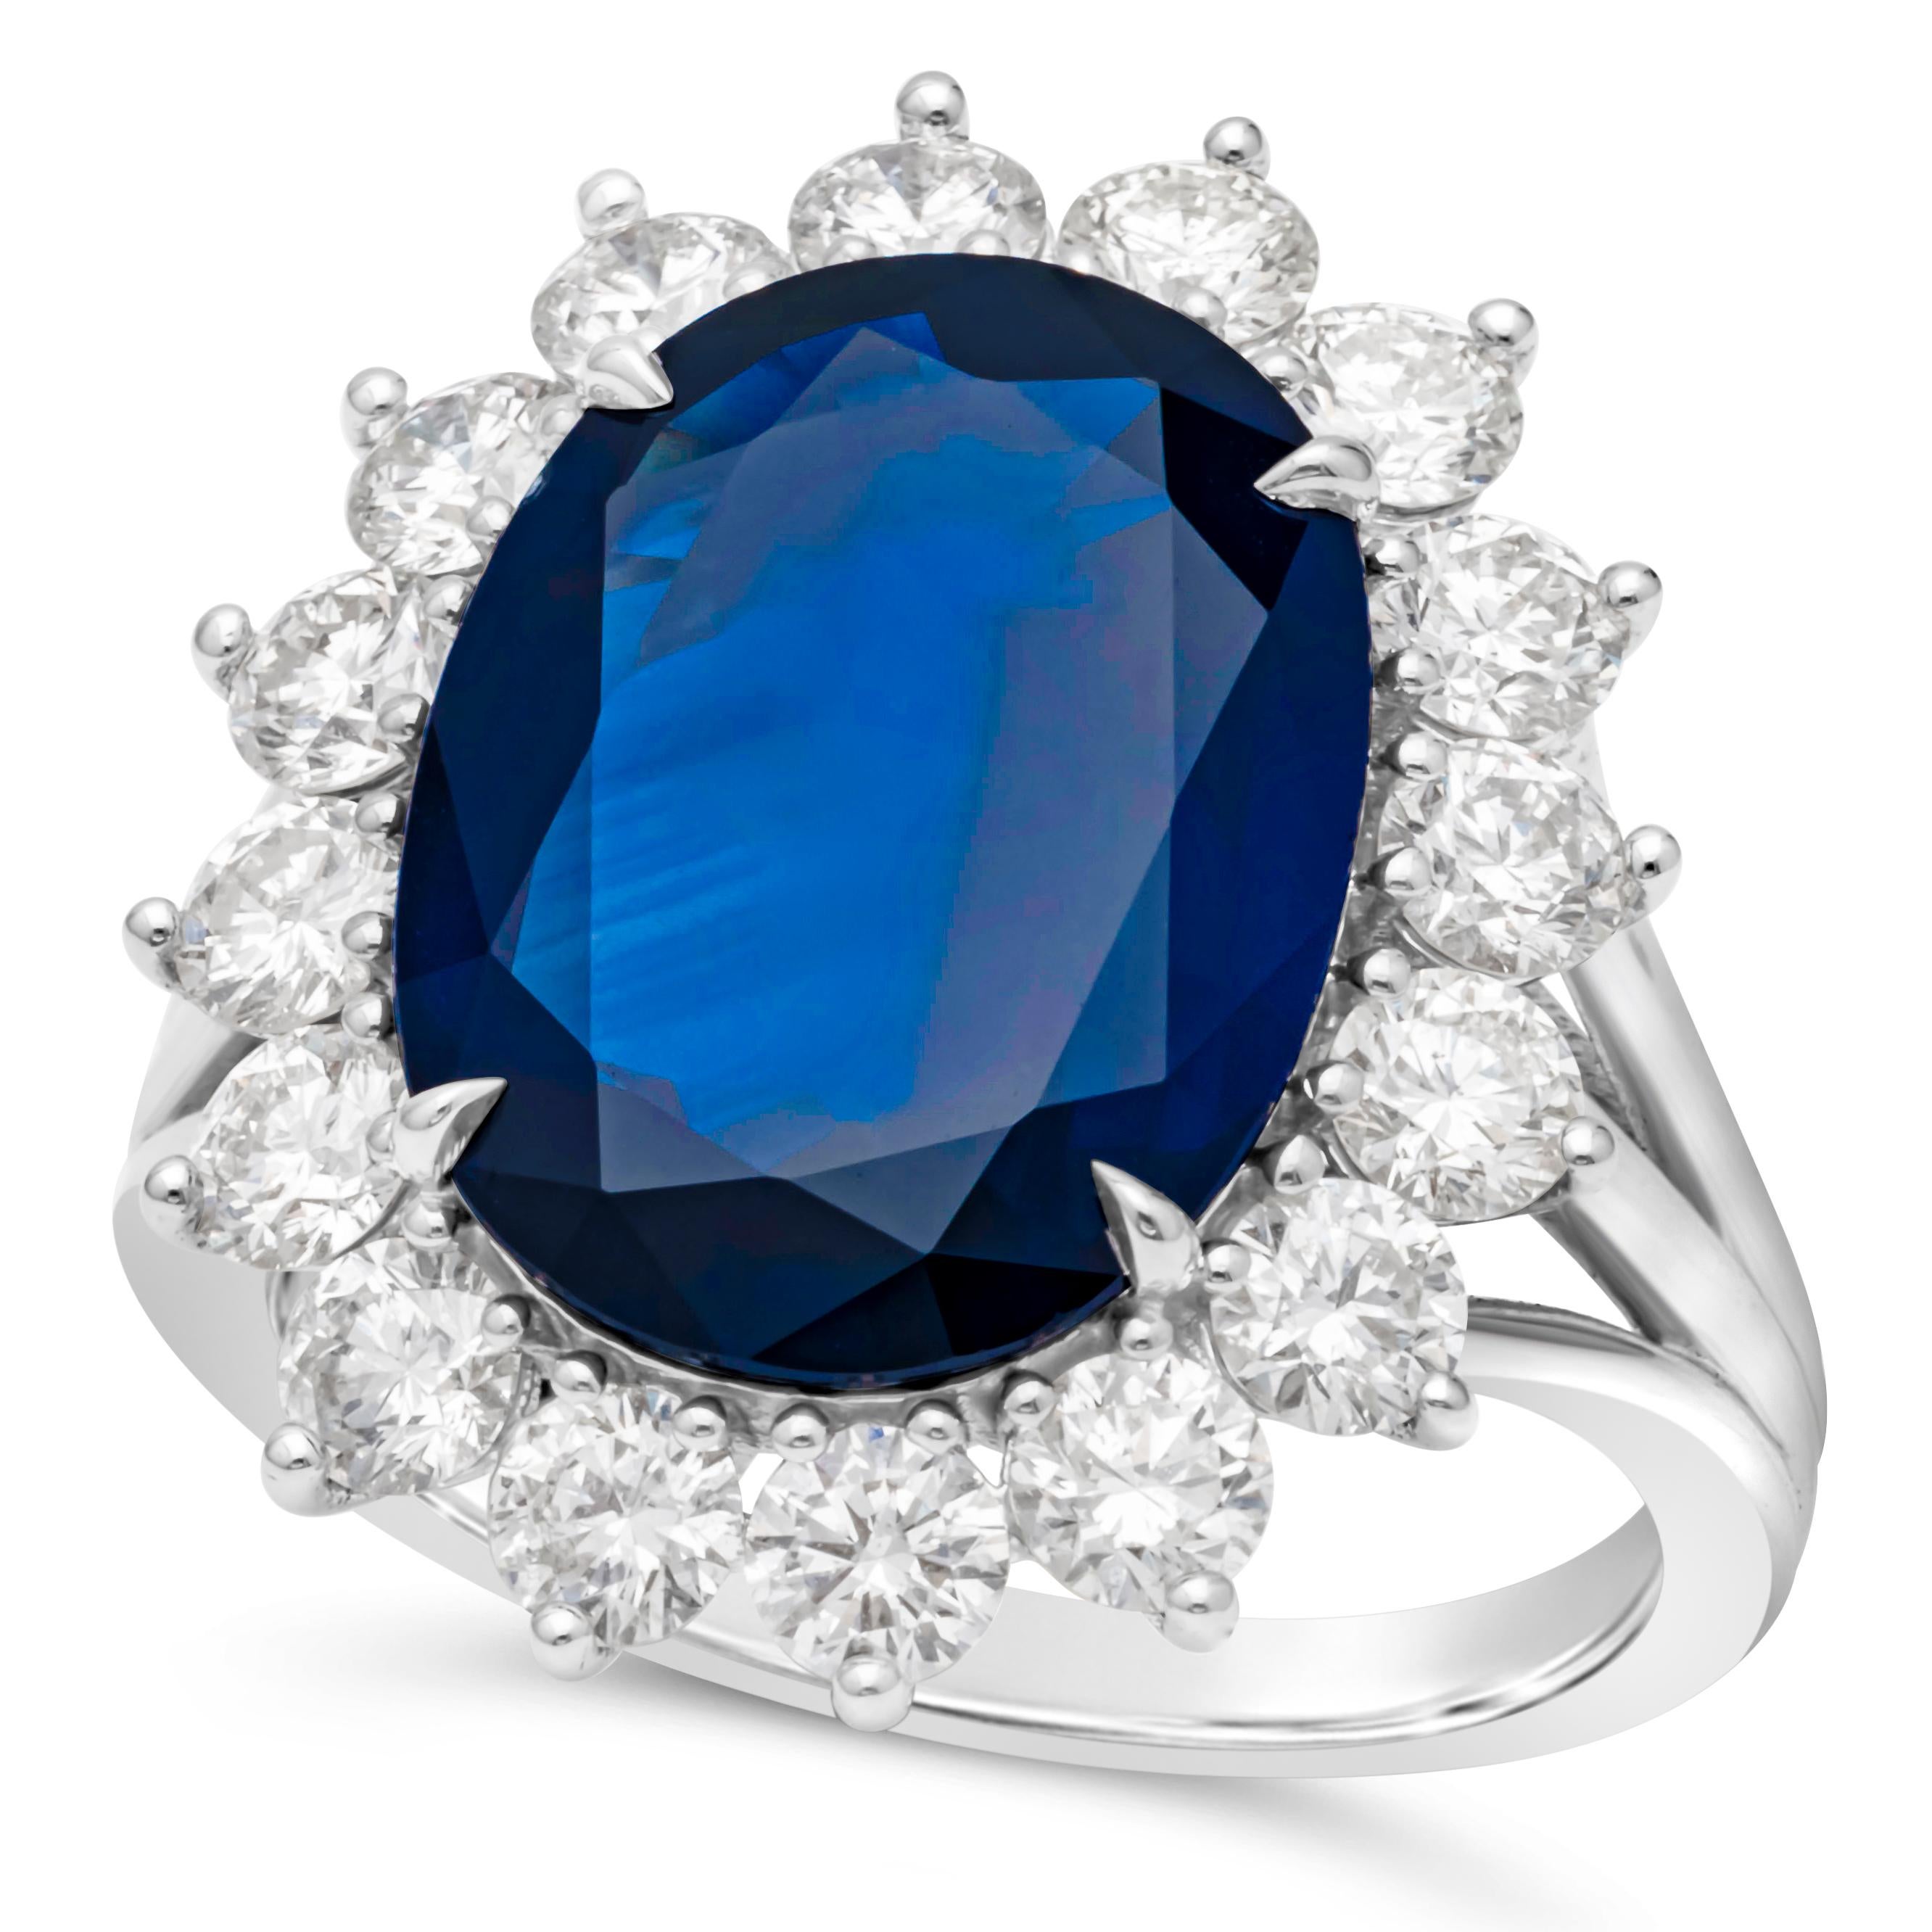 Contemporary Roman Malakov 7.71 Carats Total Oval Cut Blue Sapphire & Diamond Cocktail Ring For Sale